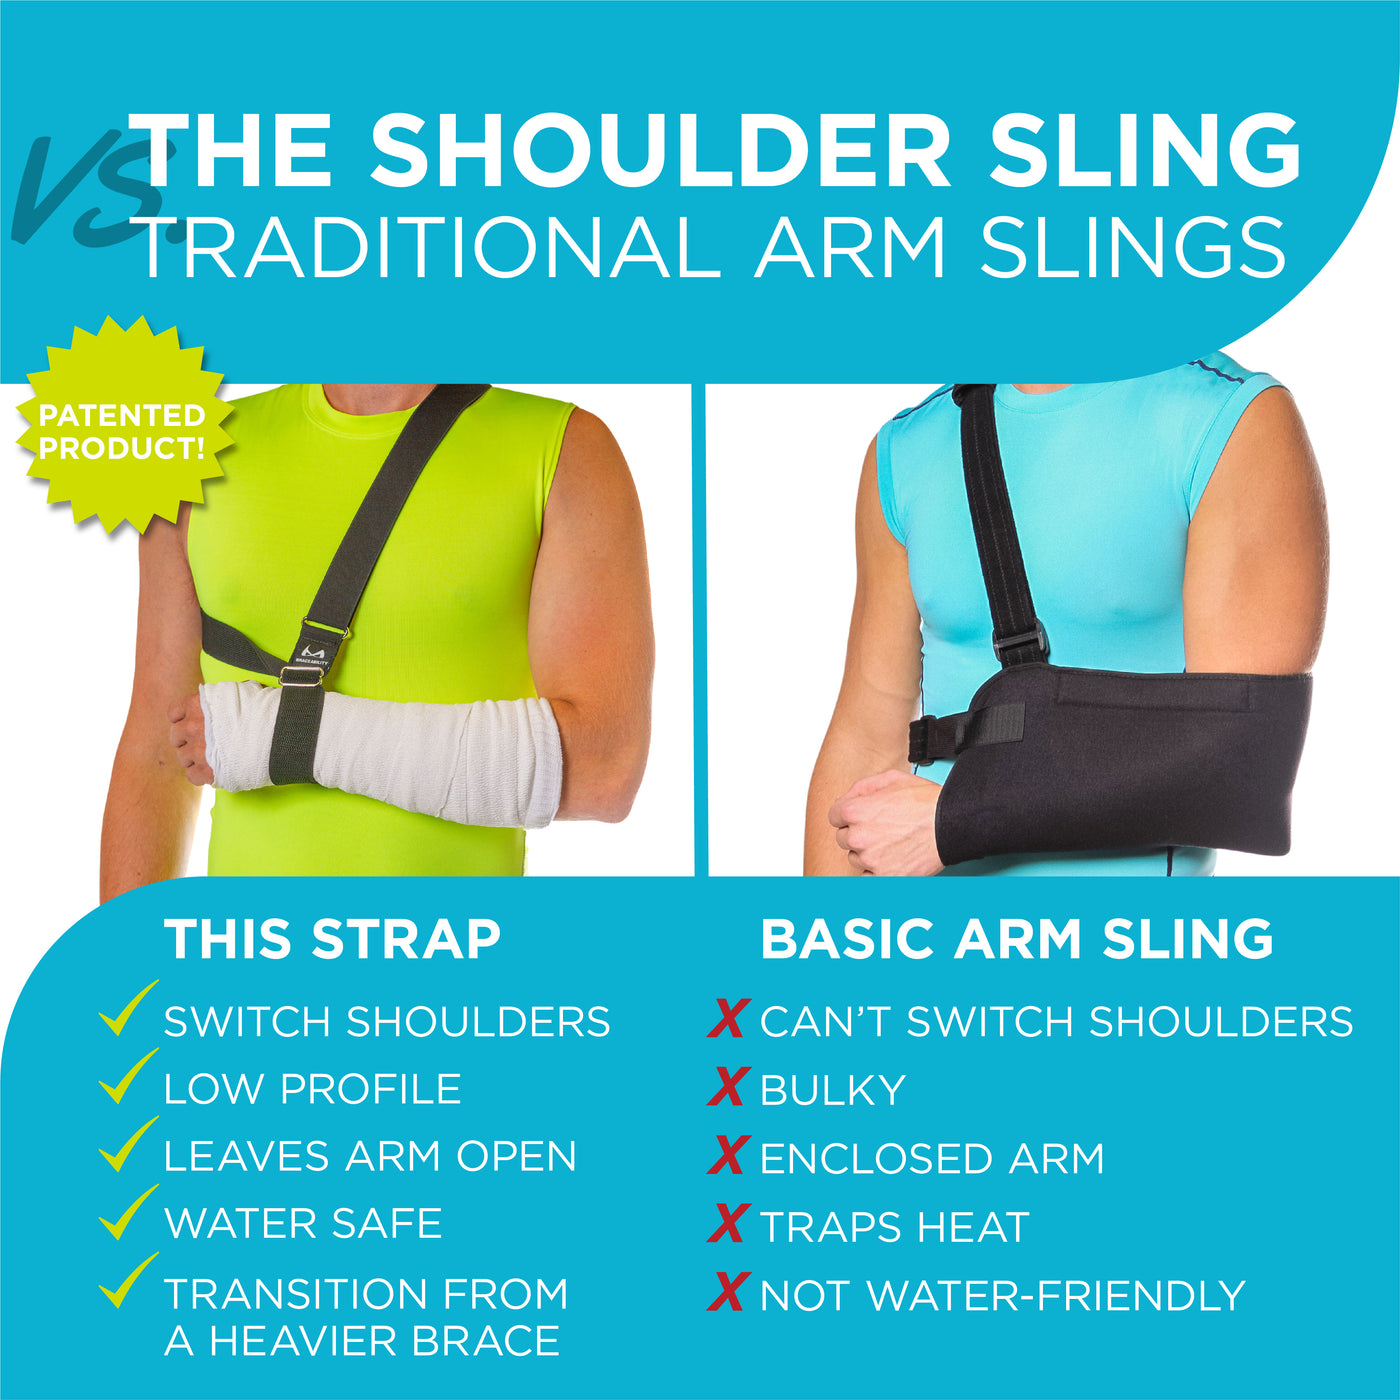 The BraceAbility Shoulder Sling leaves the elbow free to breath and is waterproof unlike traditional arm slings